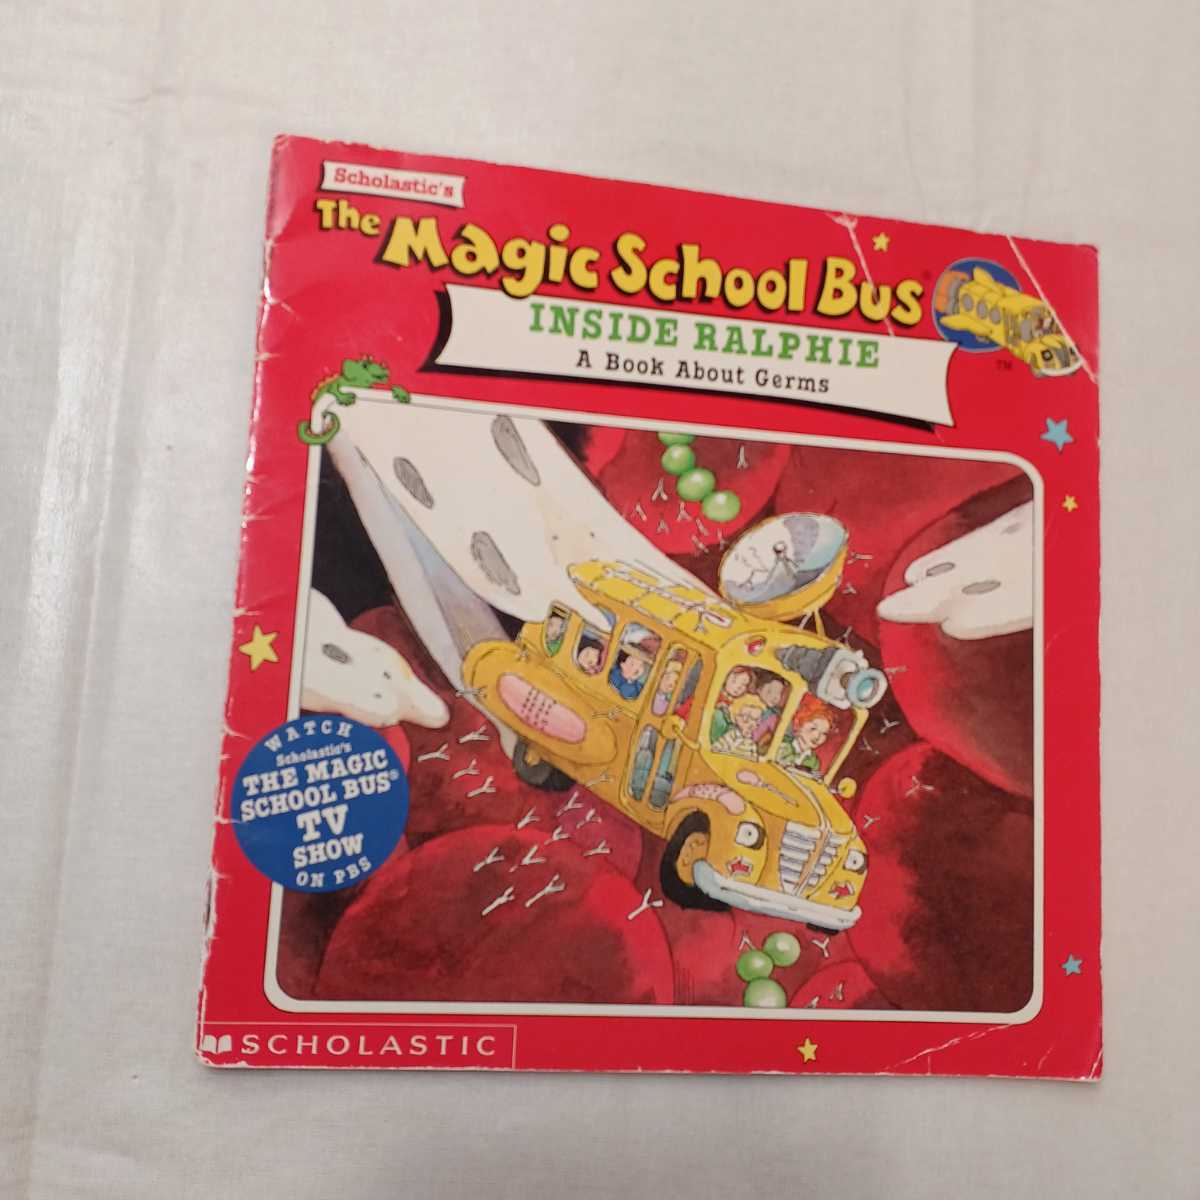 zaa-mb5♪The Magic School Bus　3冊セット　INSIDE RALPHIE/GETS BAKED IN A CAKE/GETS EATEN